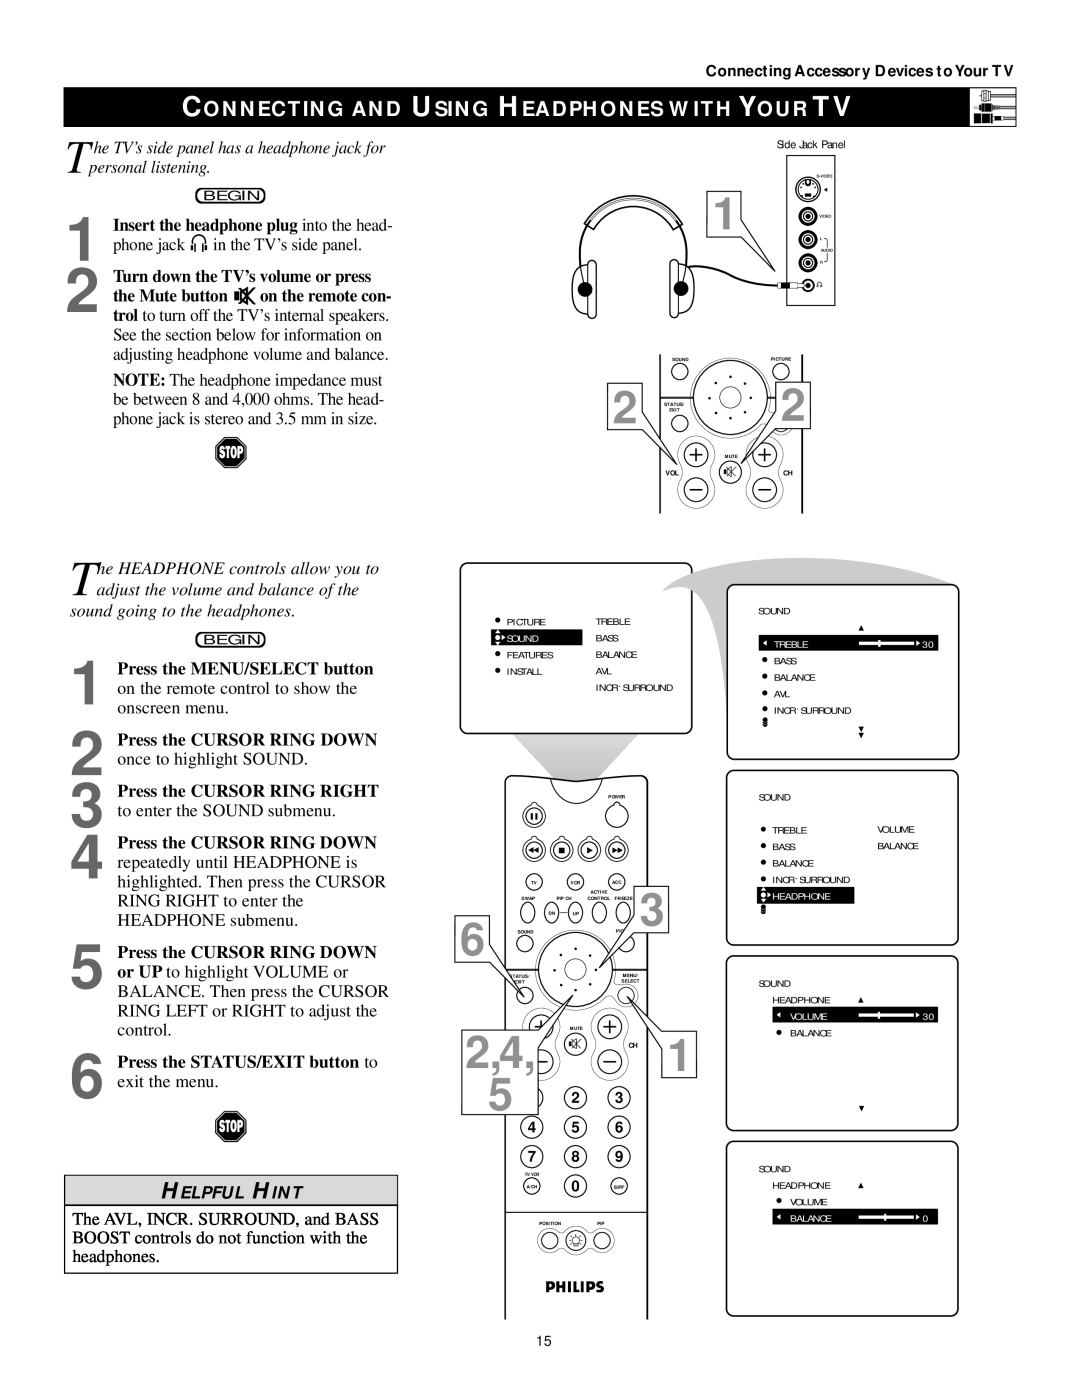 Philips 50PP 9202, 60PP9202, 43PP9202 manual Connecting And Using Headphones With Your Tv, Helpful Hint 